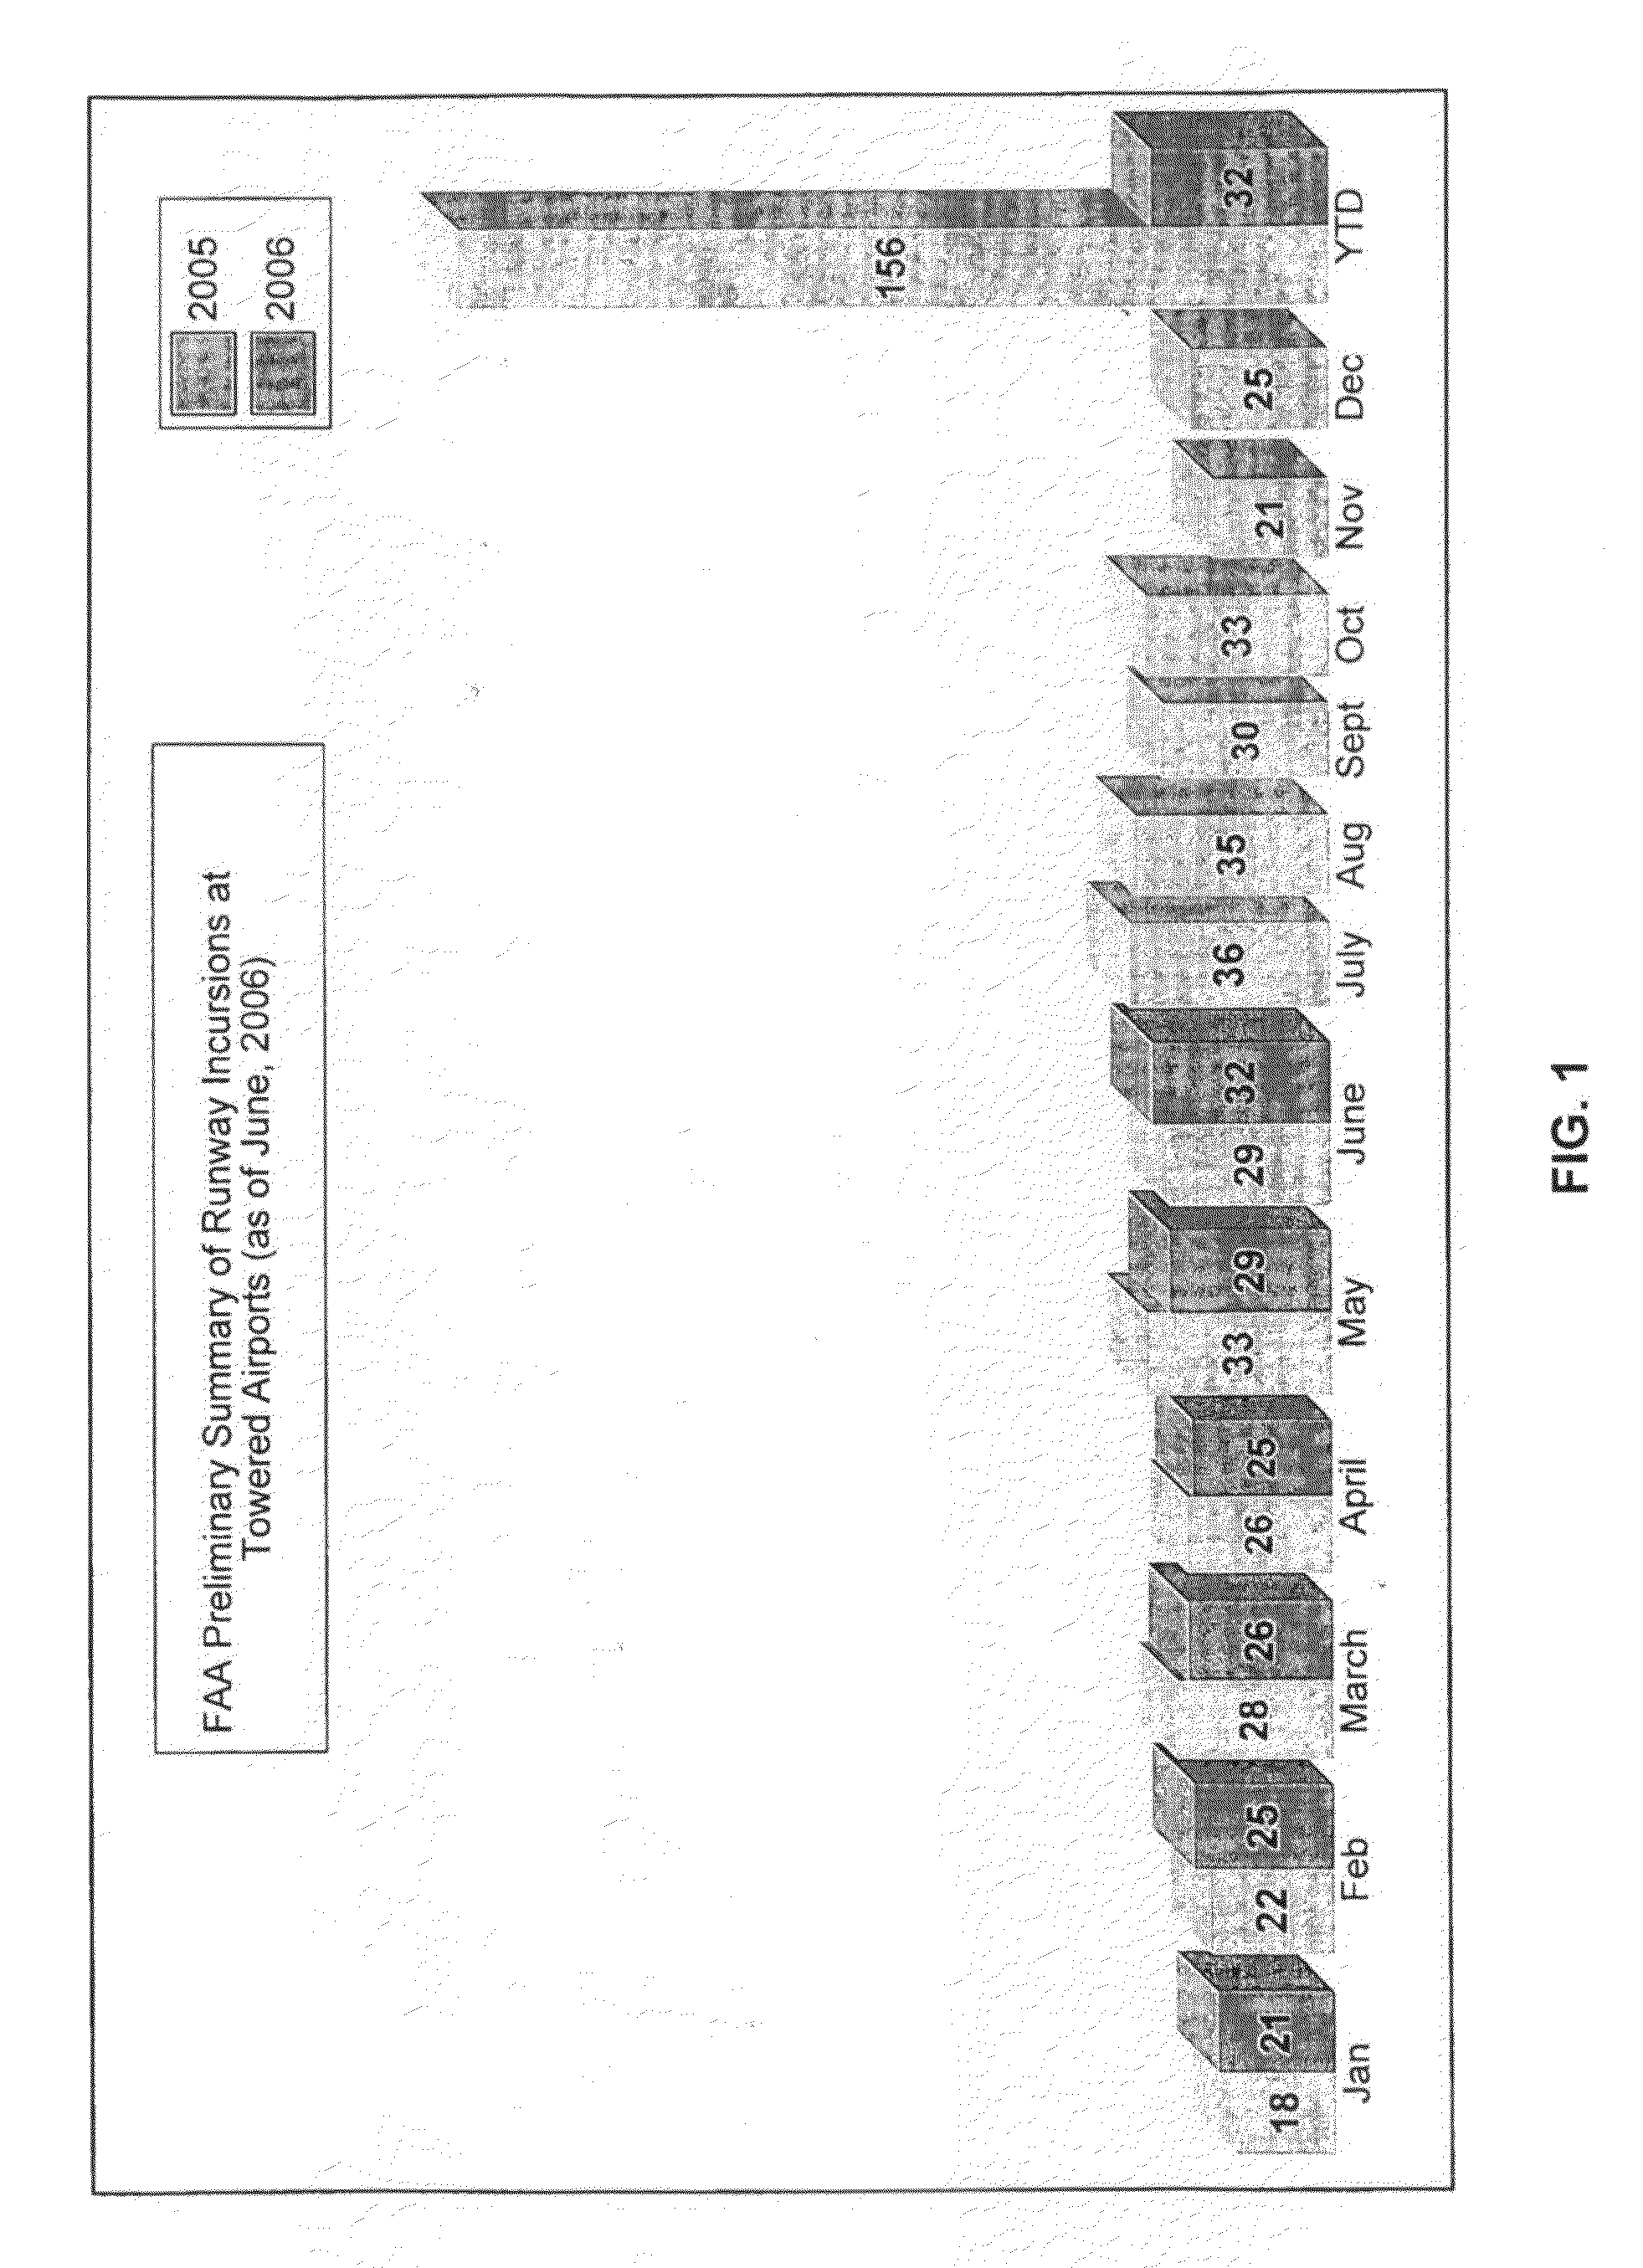 Aircraft Anti-collision system and method